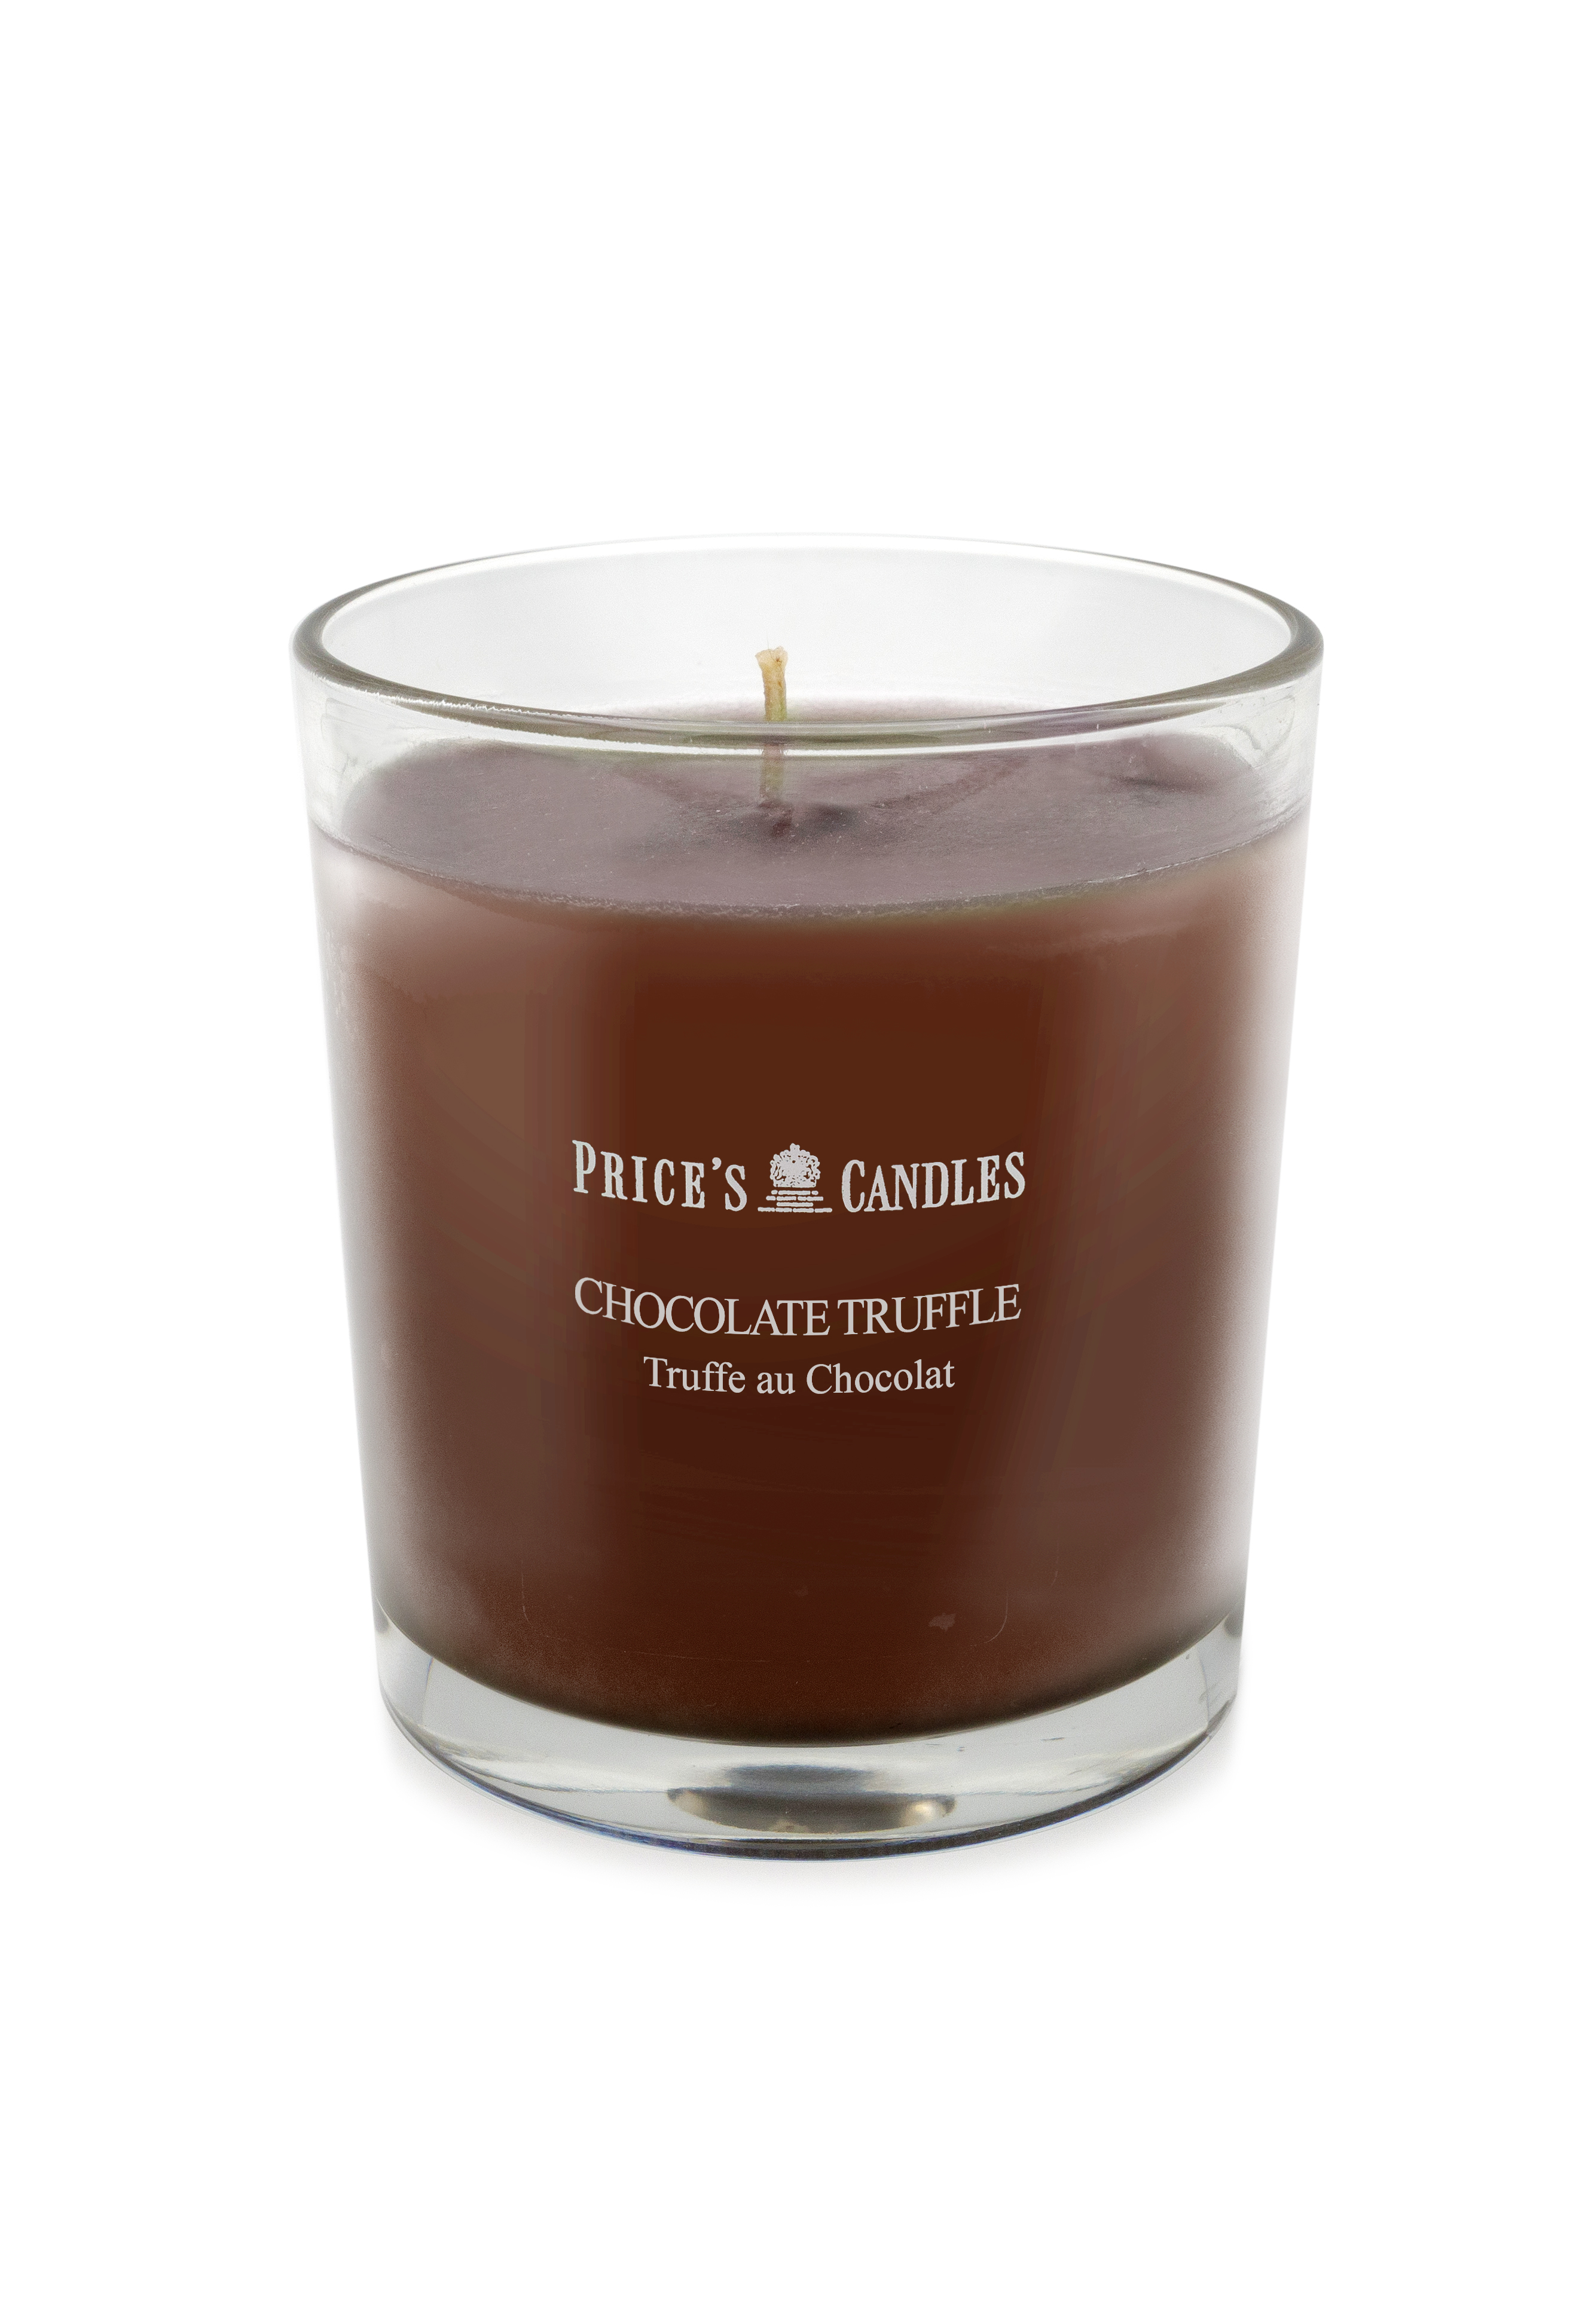 Prices Candle "Chocolate Truffle" 170g        